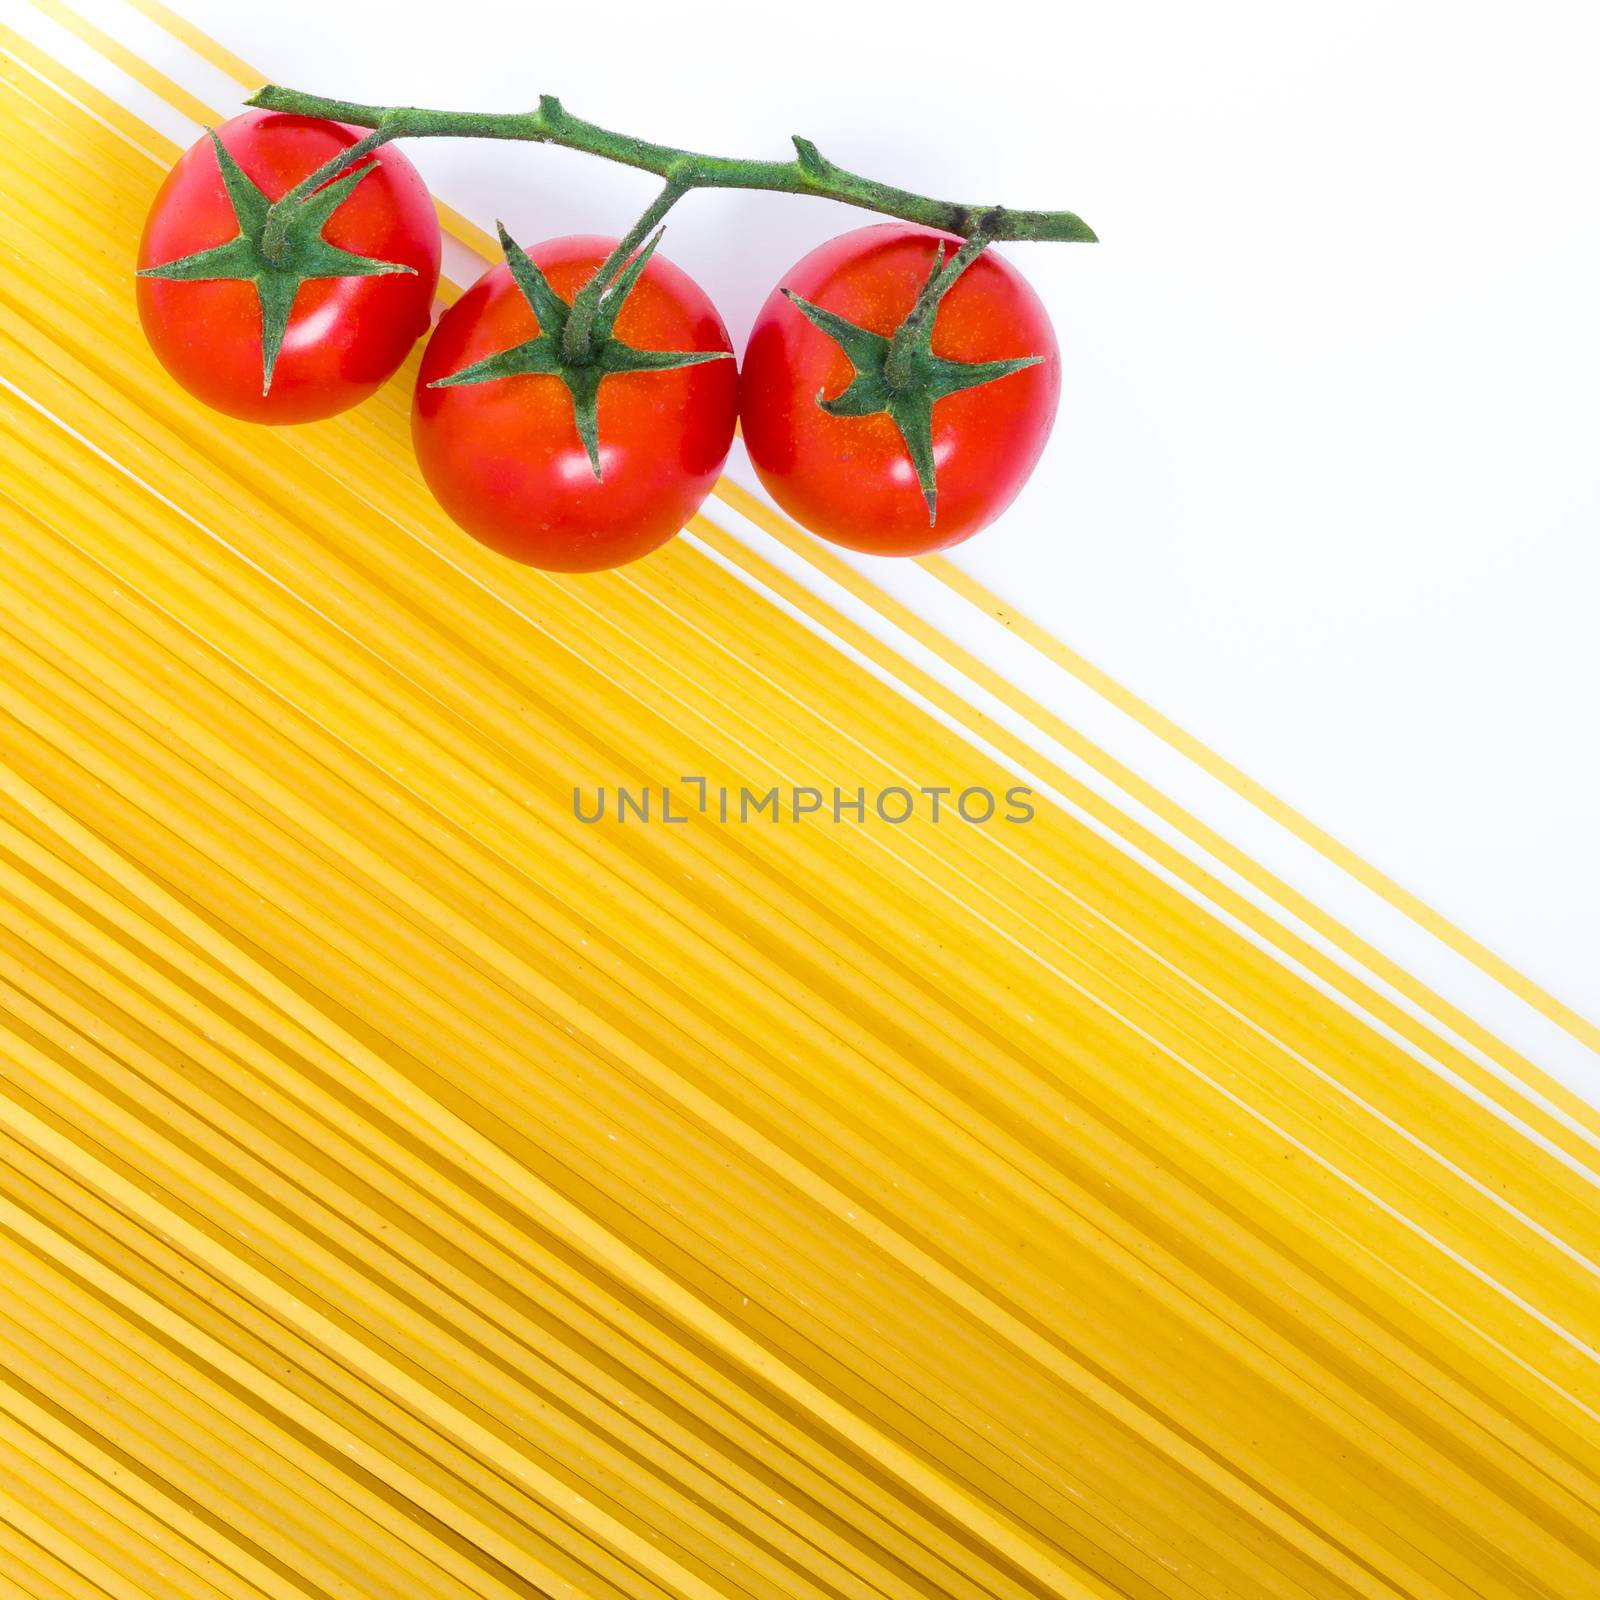 Spaghetti and cherry tomatoes isolated on white background. Uncooked Italian dried spaghetti. Top view. Flat lay.